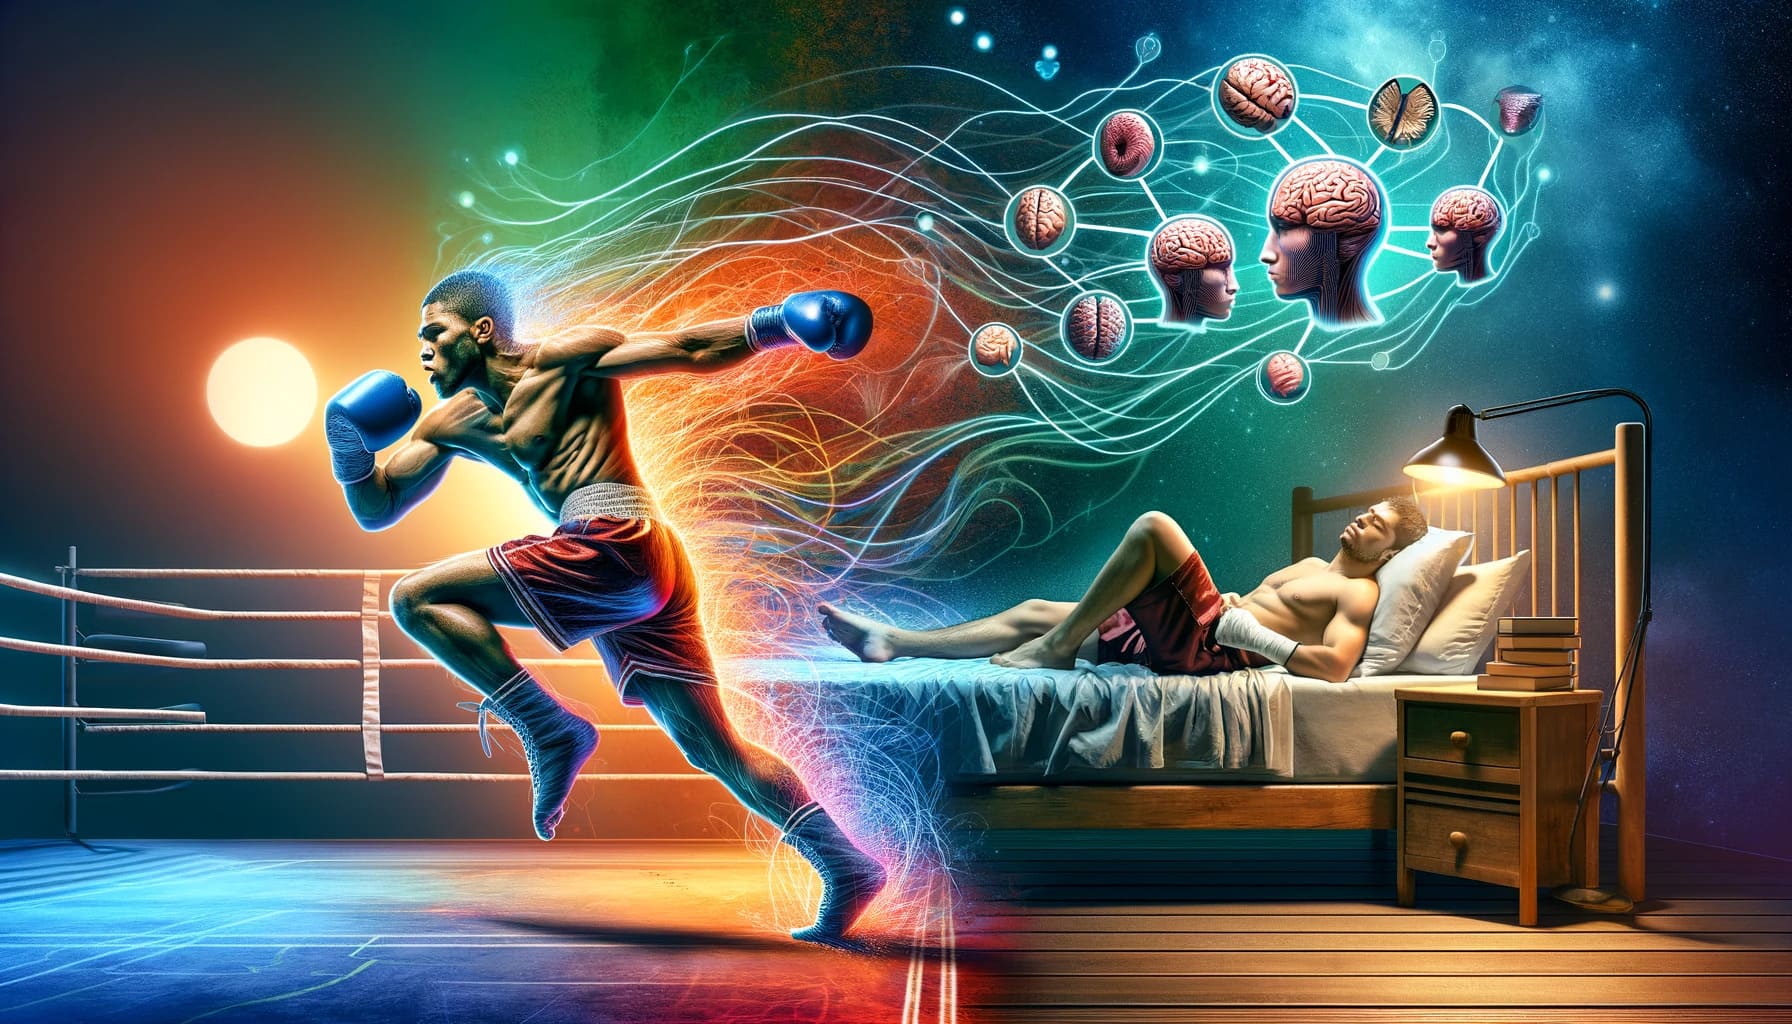 Dreaming of boxing success with dynamic visual effects linking a sleeping man and an active boxer.